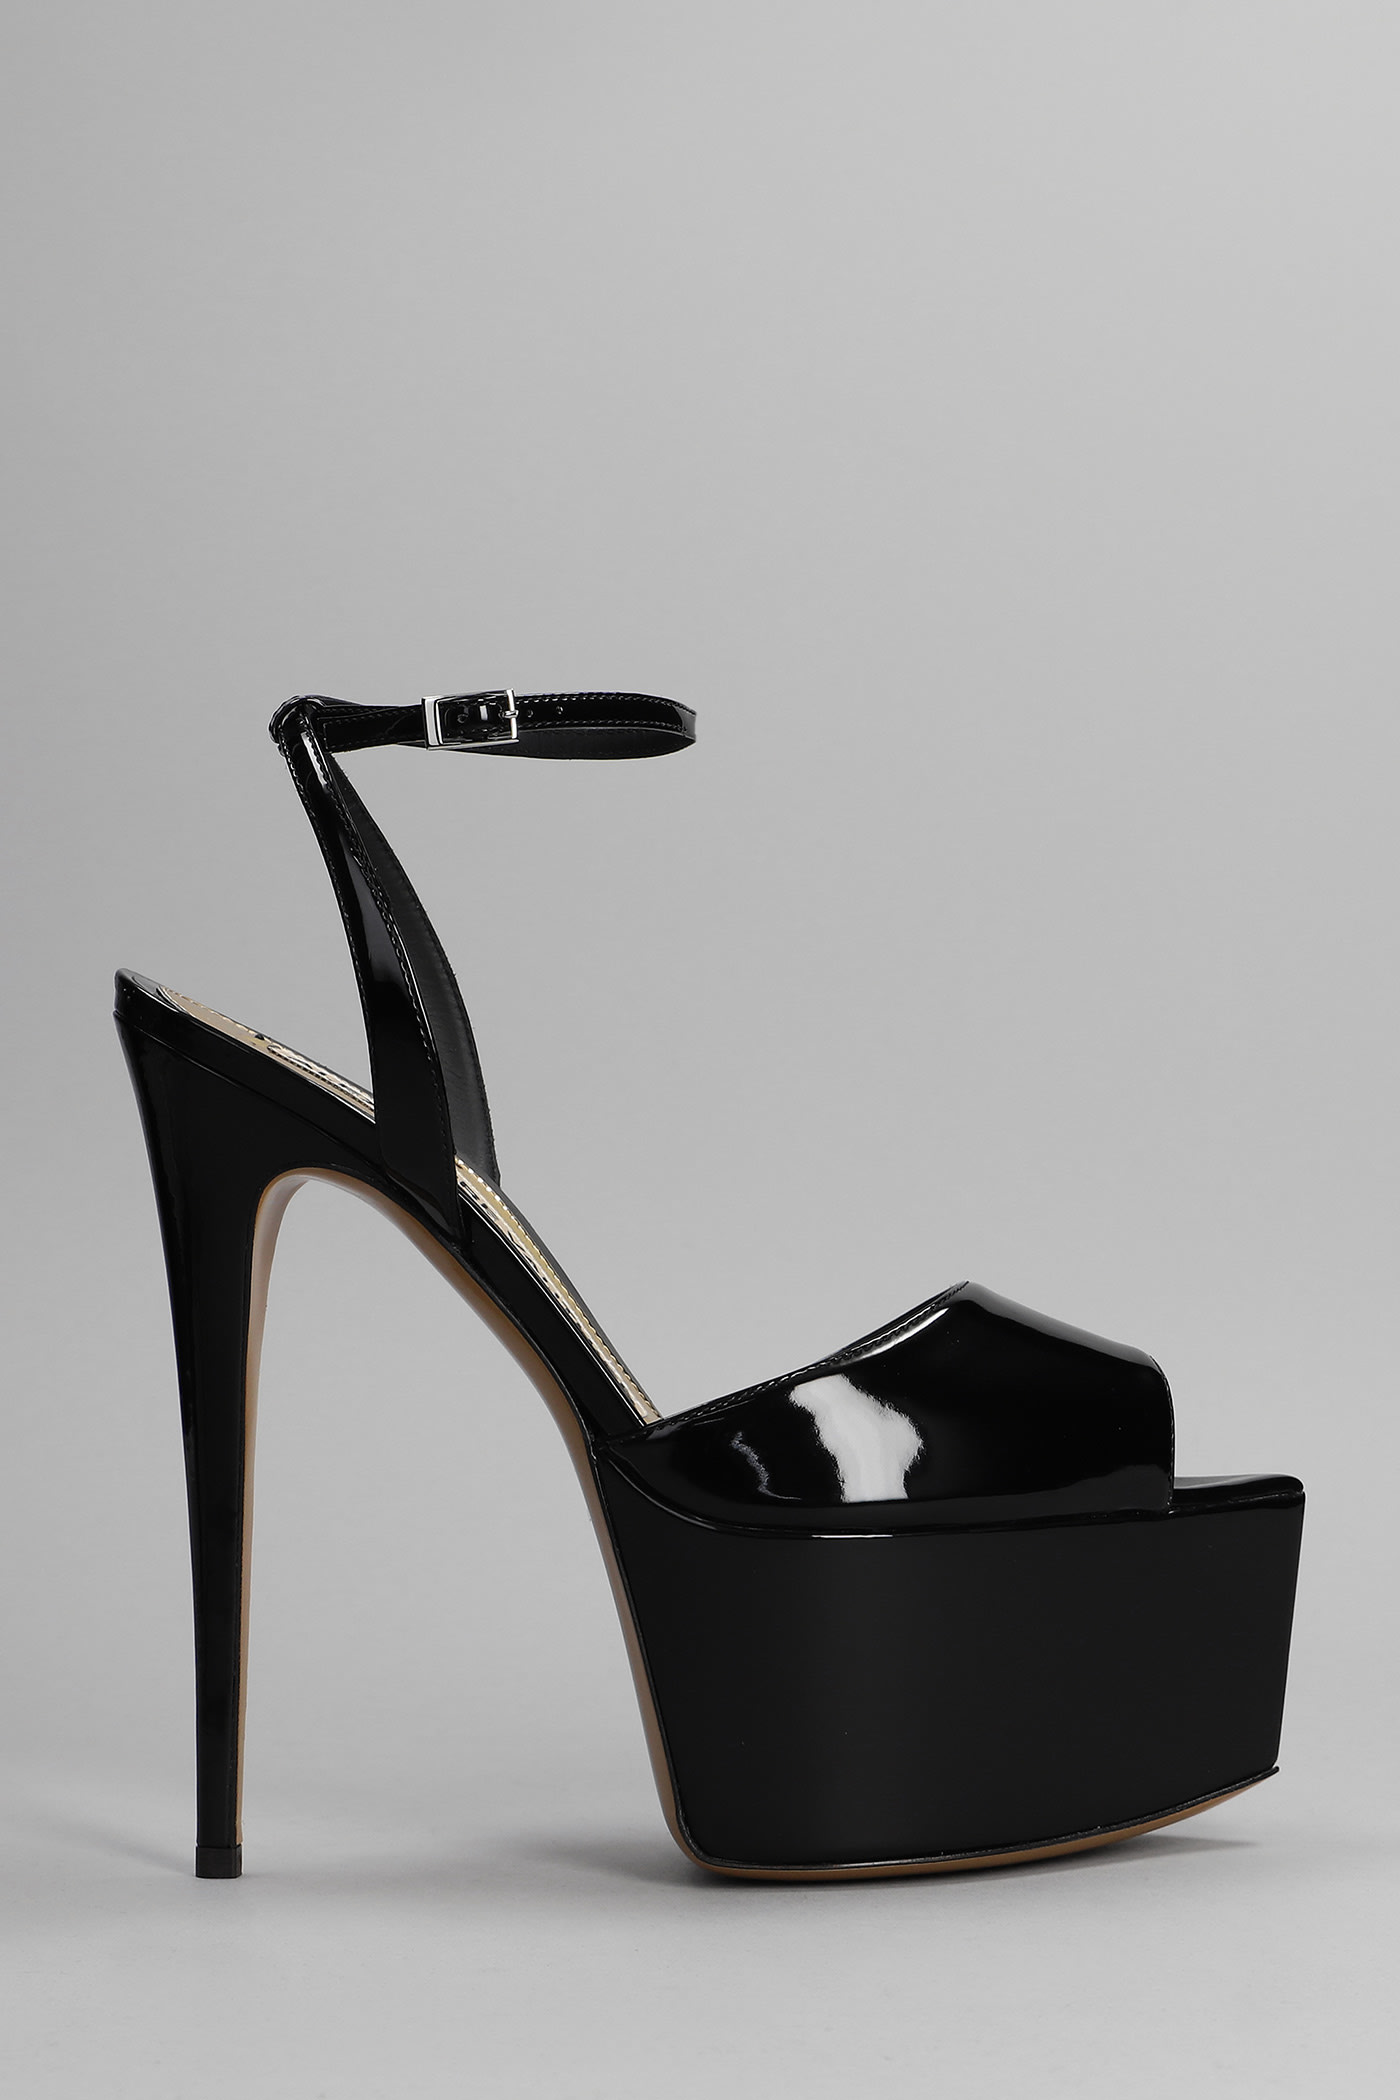 ALEXANDRE VAUTHIER SANDALS IN BLACK PATENT LEATHER